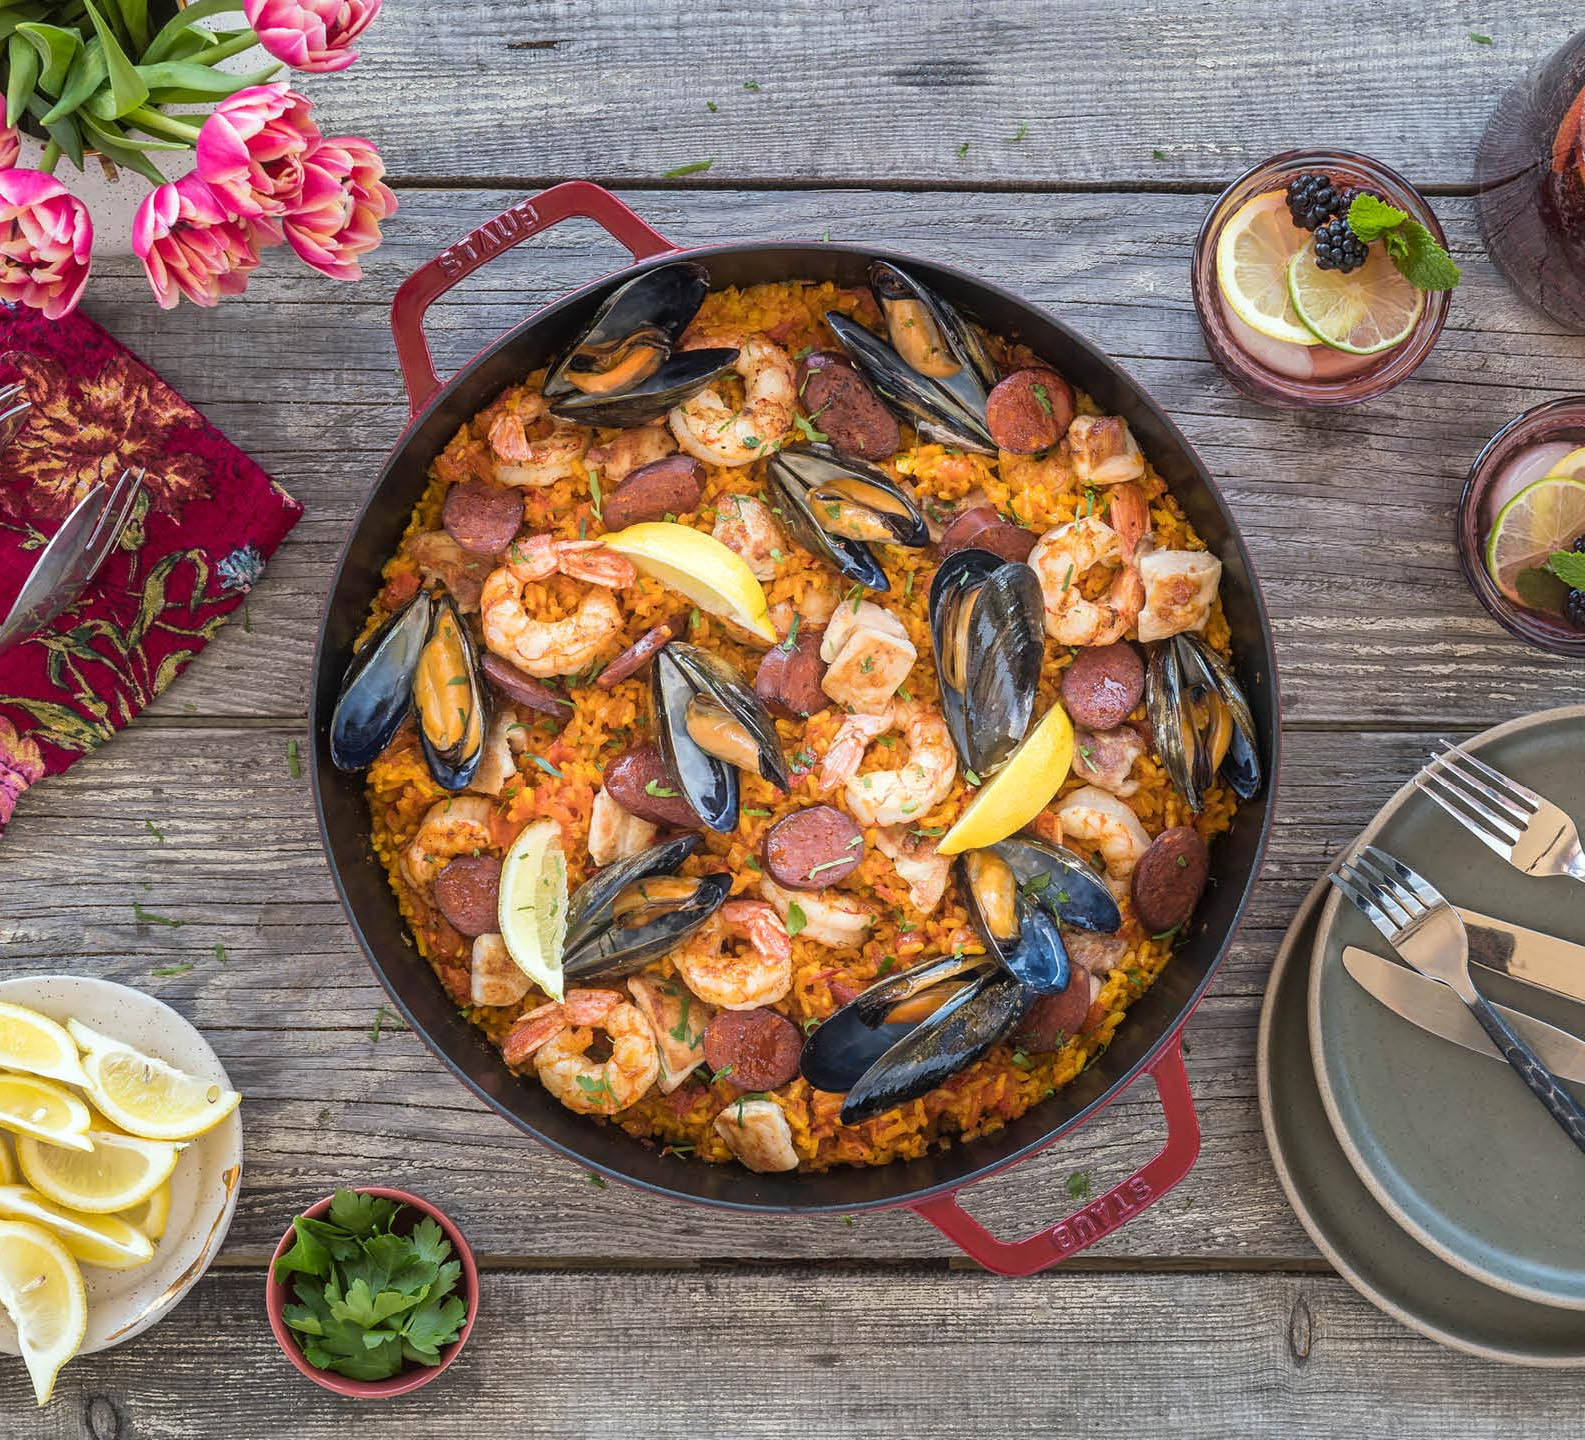 Paella Rice Dish Mixed With Seafood Wallpaper